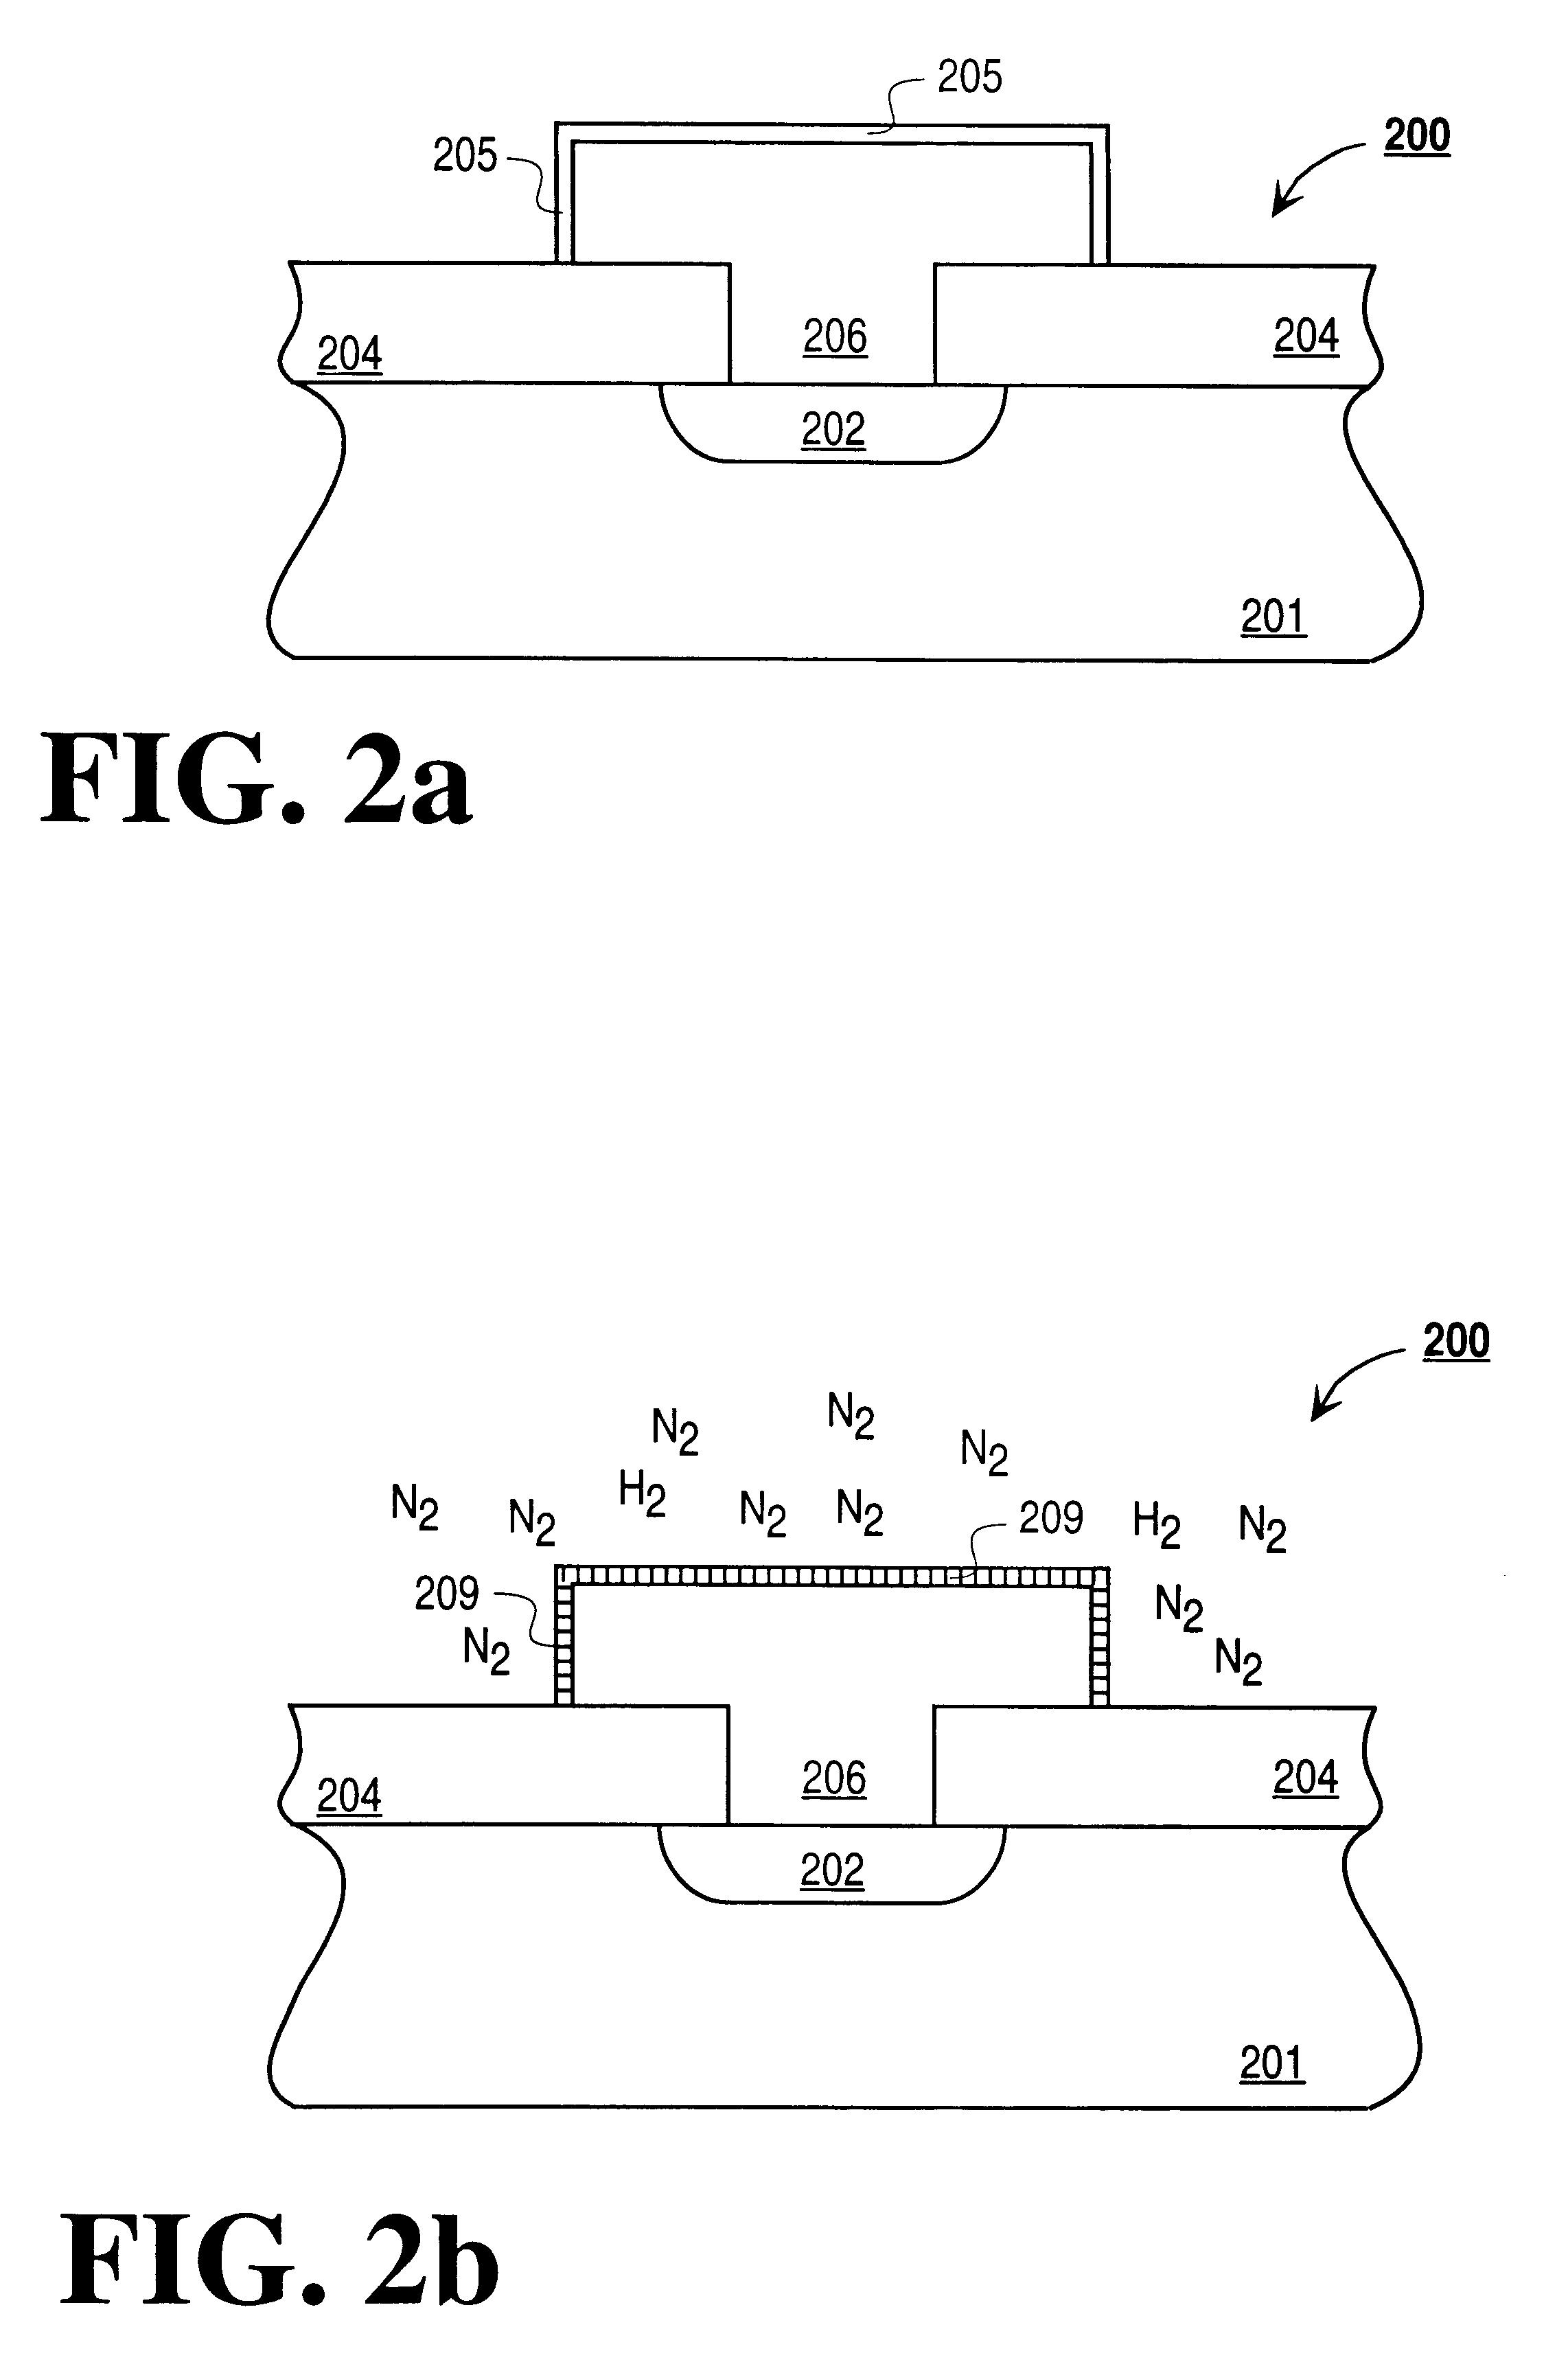 Post deposition treatment of dielectric films for interface control